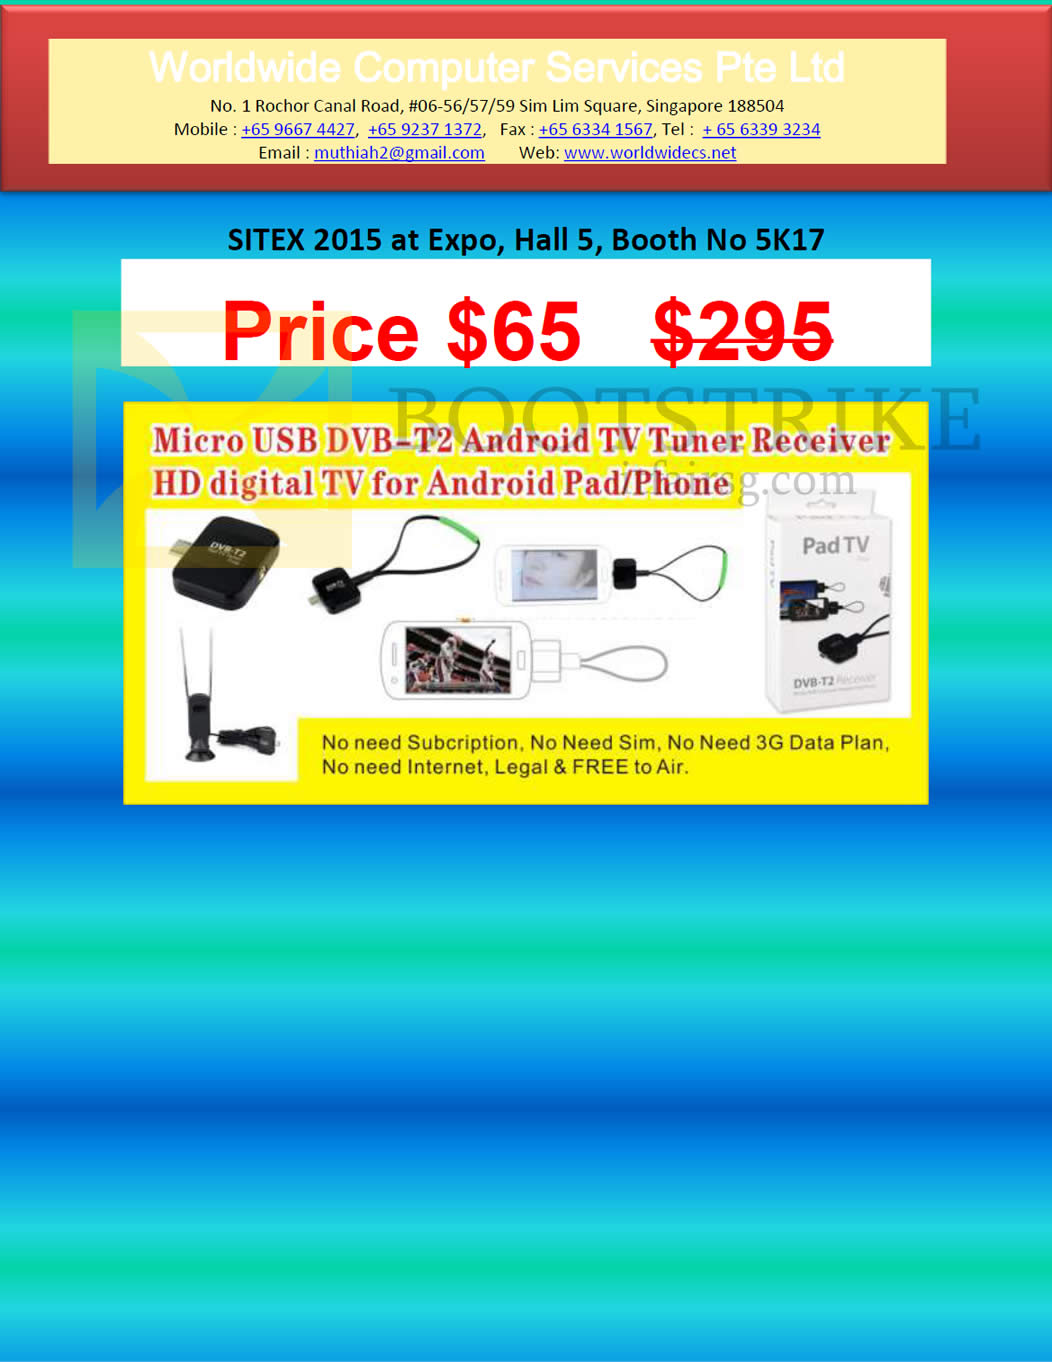 SITEX 2015 price list image brochure of Worldwide Computer Services Micro USB DVB-T2 Android TV Runer Receiver